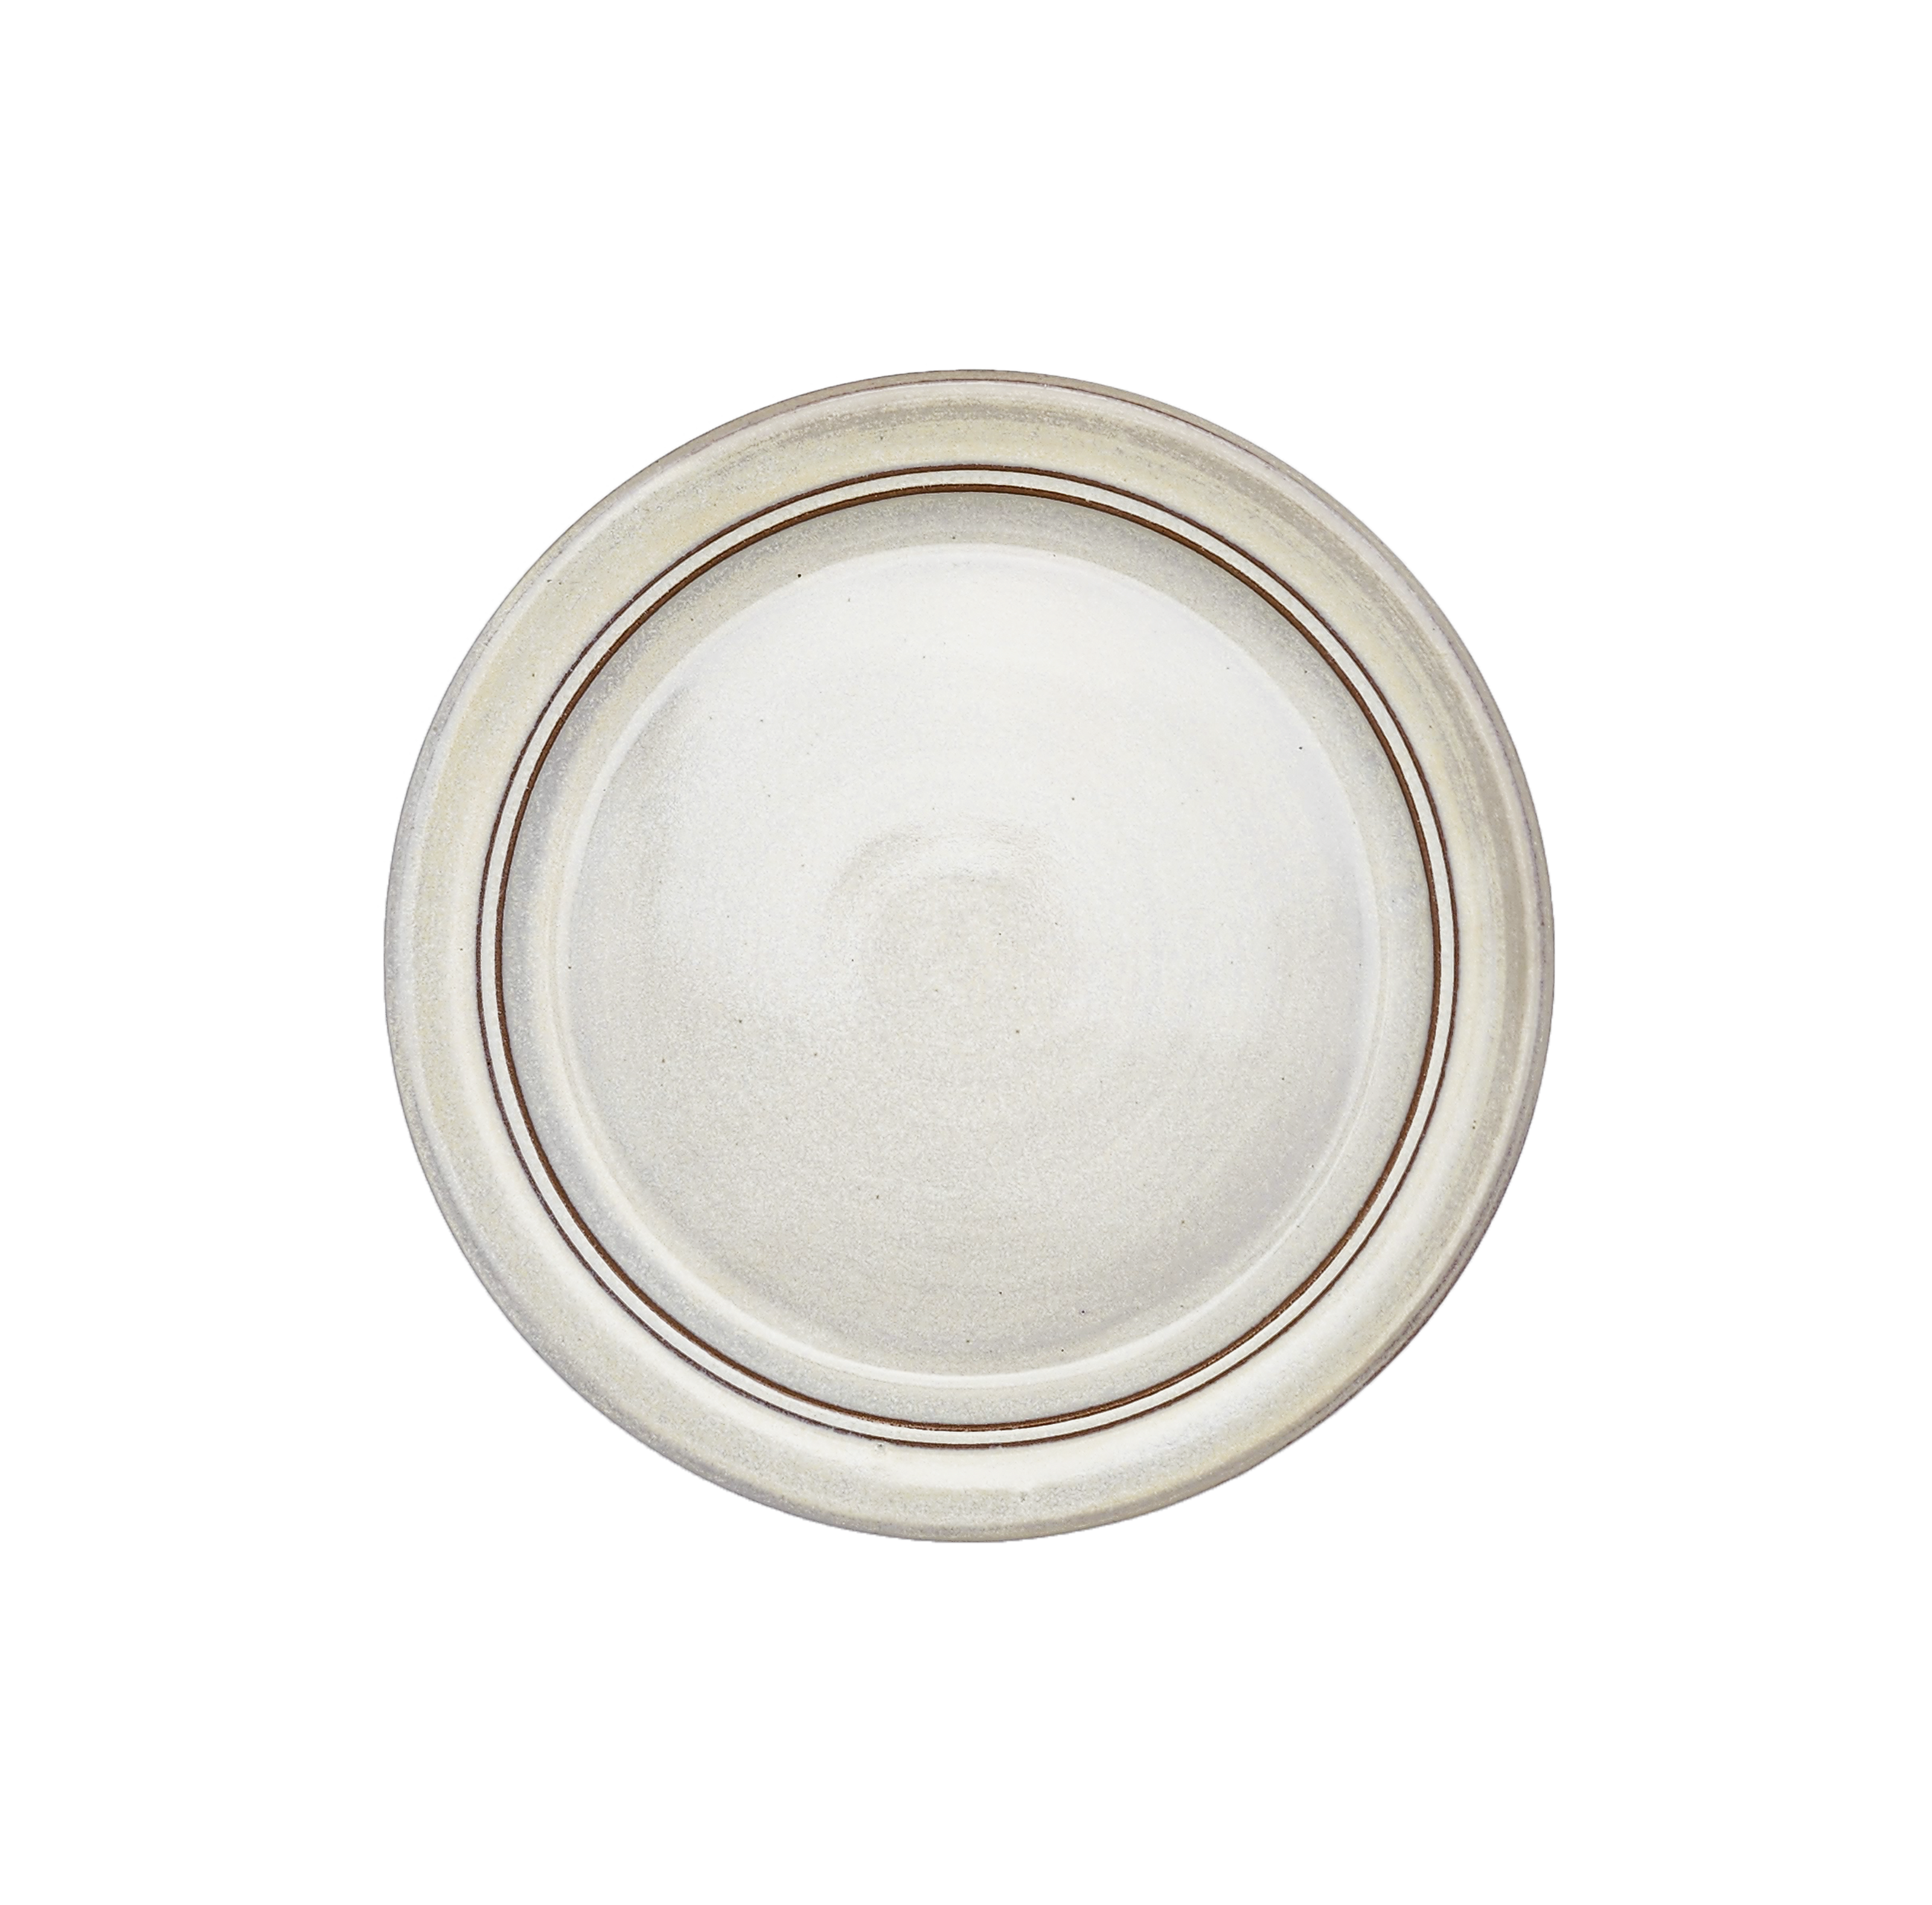 Image Description for Lunch Plate (8.5"): A classic white lunch plate from Clinton Pottery's Handmade Dinnerware Collection. The 8.5-inch plate features a clean and timeless glaze, adding a touch of simplicity and elegance to your dining setting. Its versatile size makes it ideal for serving smaller meals or appetizers with a classic and refined aesthetic.